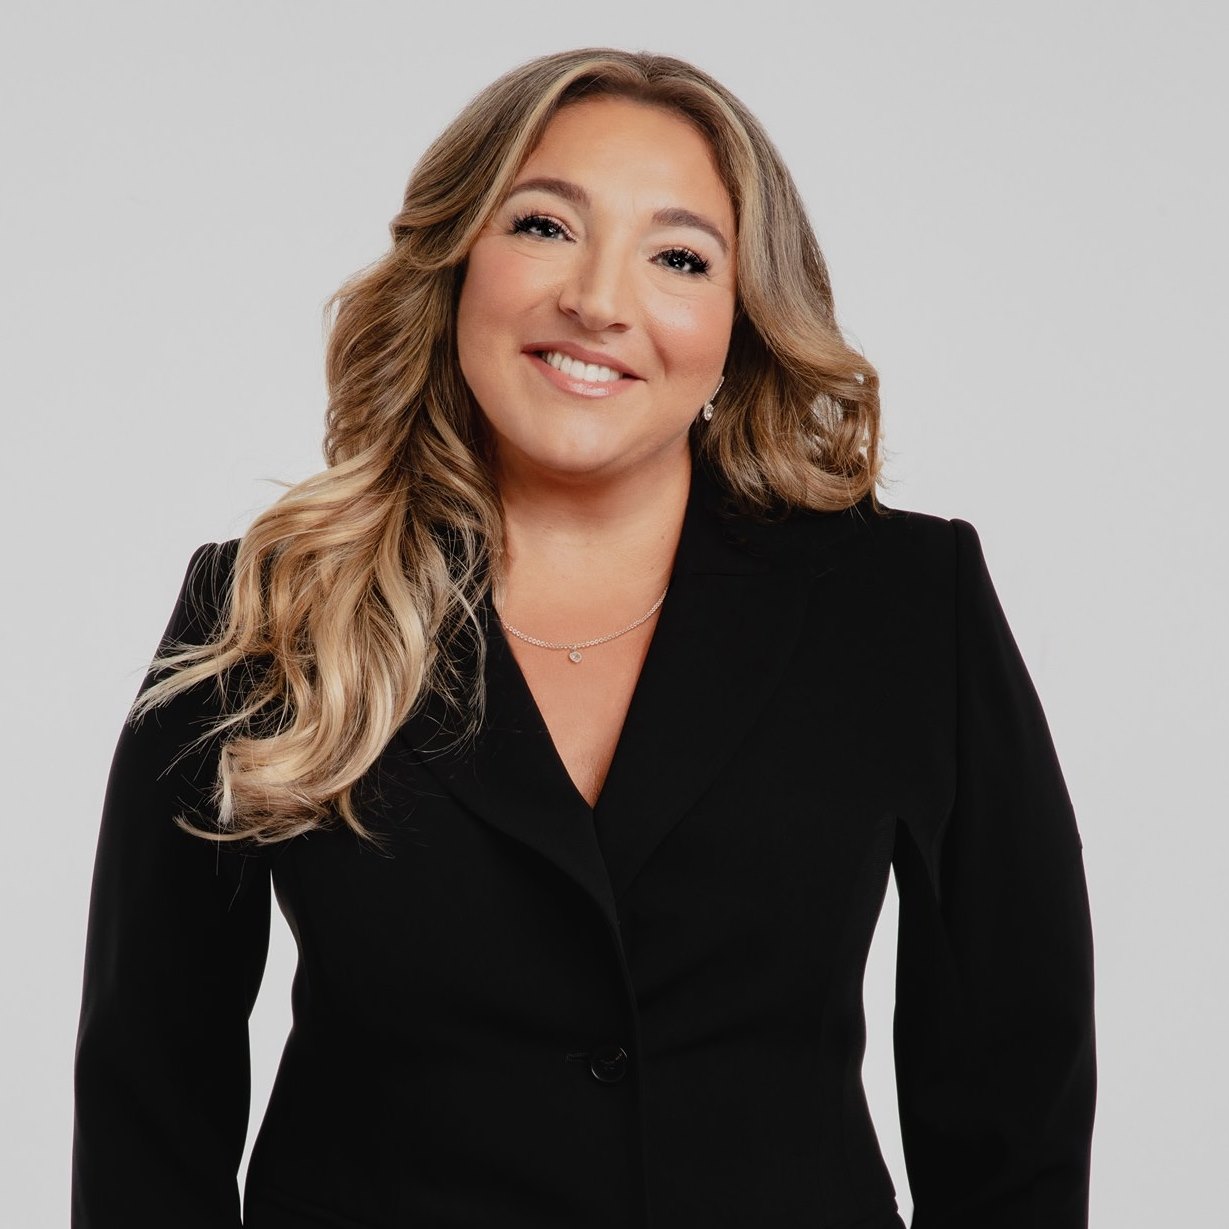 The United Nations Foundation’s Shot@Life campaign announces Jo Frost, global parenting expert and best-selling author, as an official ambassador to the campaign.